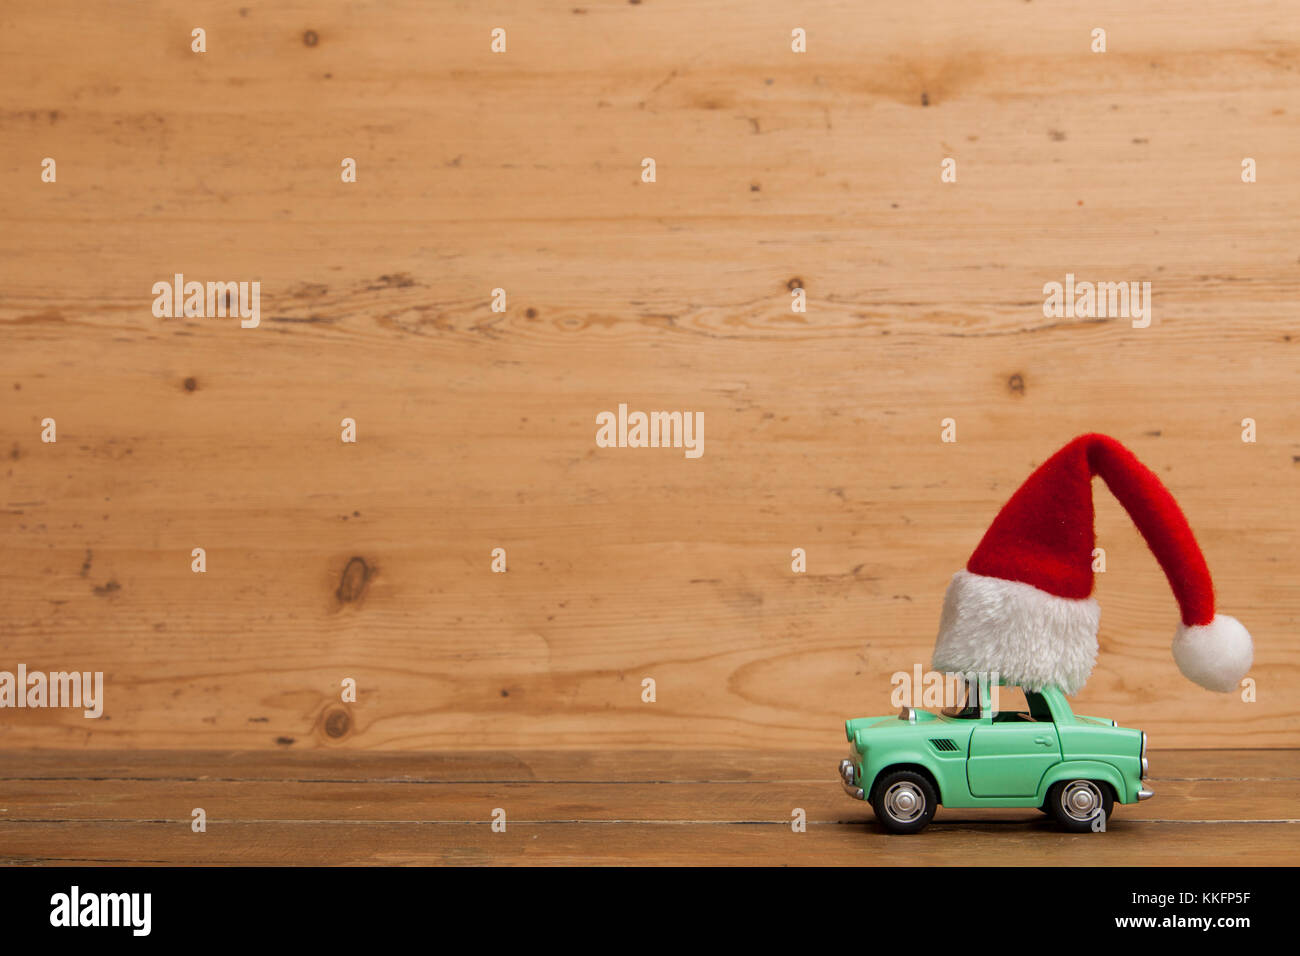 LONDON, UK - DECEMBER 30th 2016: Christmas background concept. Toy car with a Santa hat Stock Photo